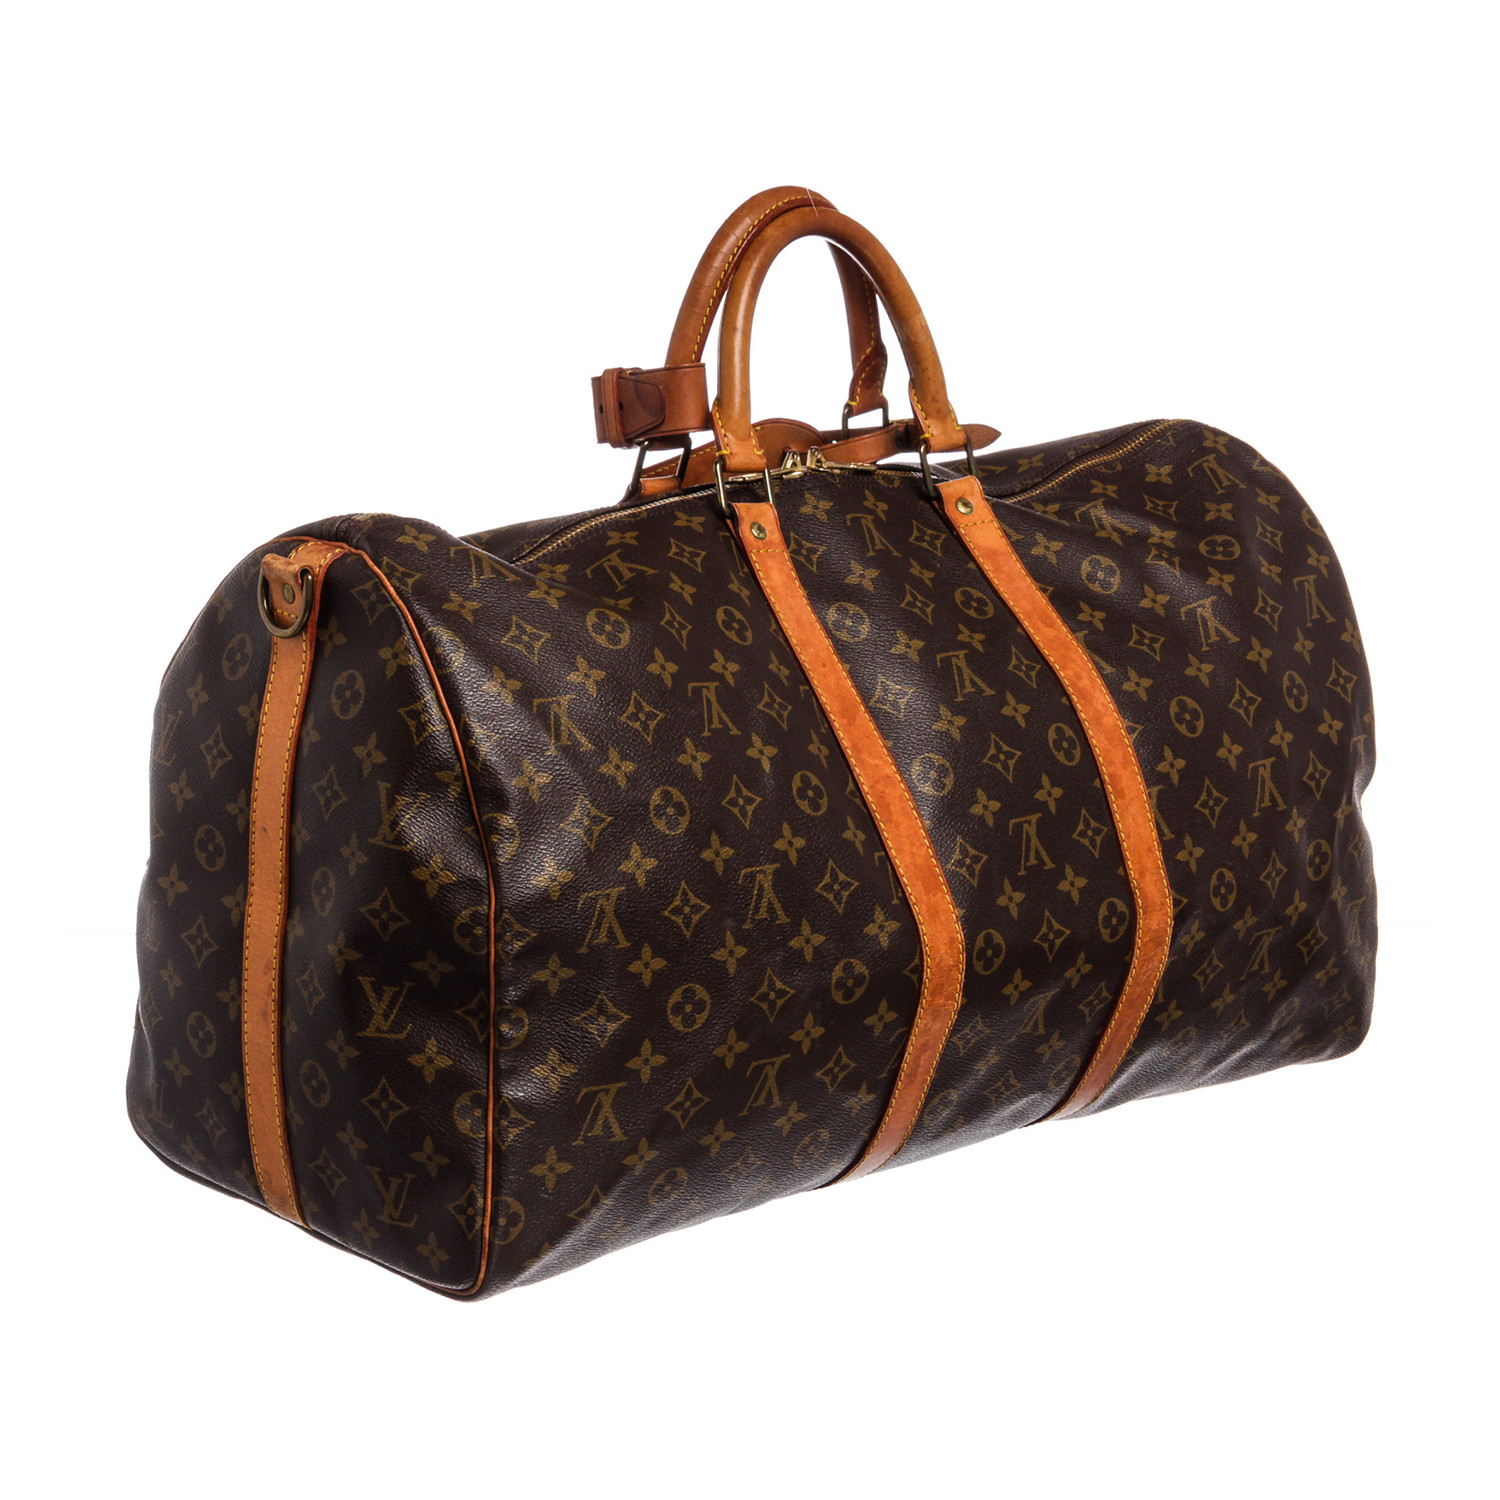 Monogram Canvas Leather Keepall 55 cm Bandouliere Duffle Bag Luggage // Pre-Owned // SP0970 ...